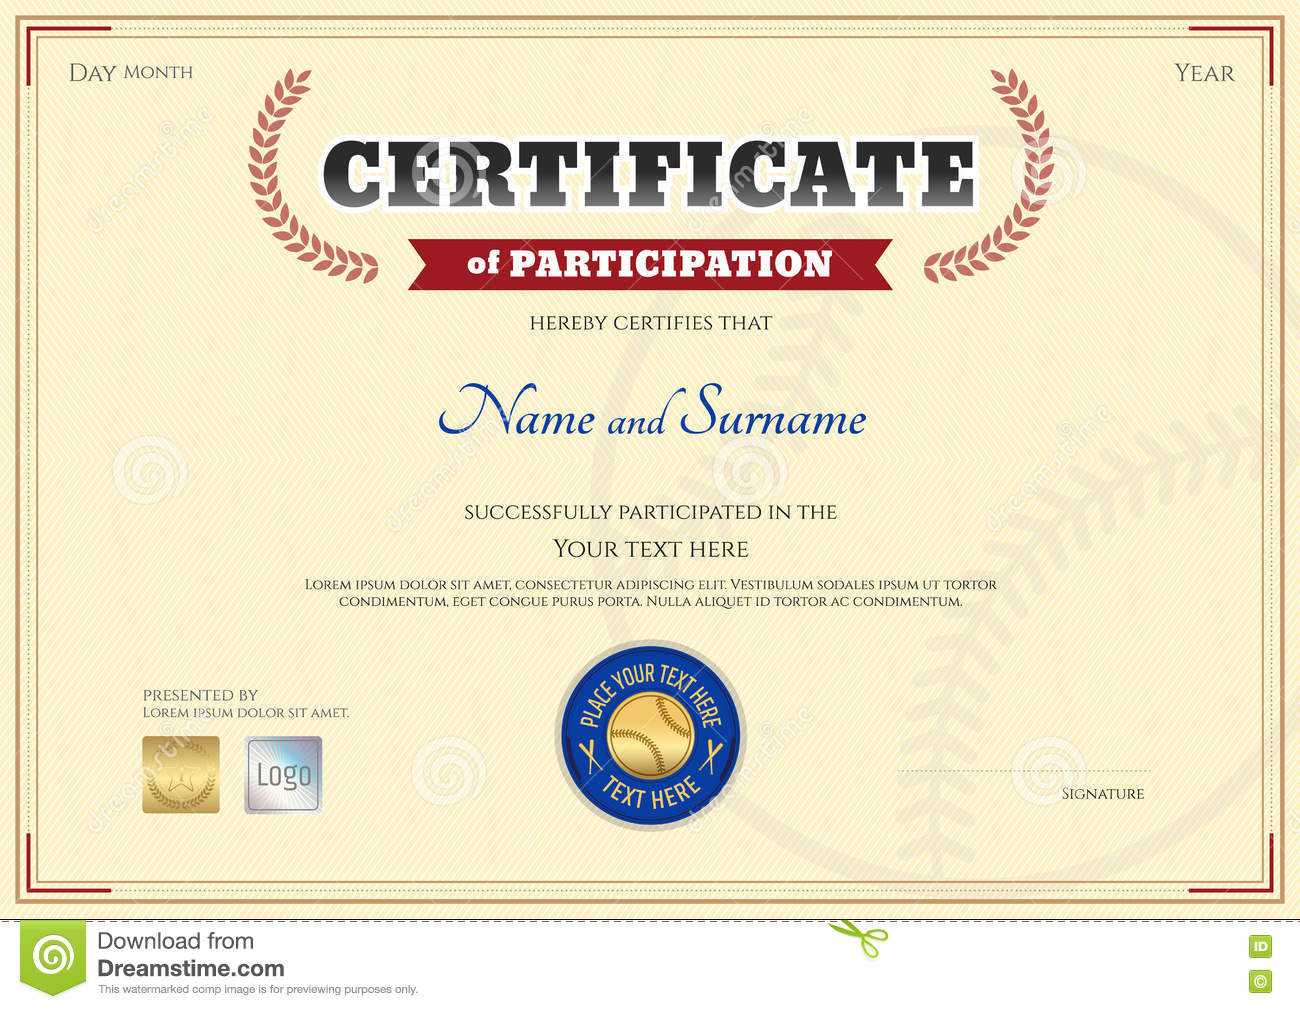 Certificate Of Participation Template In Baseball Sport Throughout Certification Of Participation Free Template